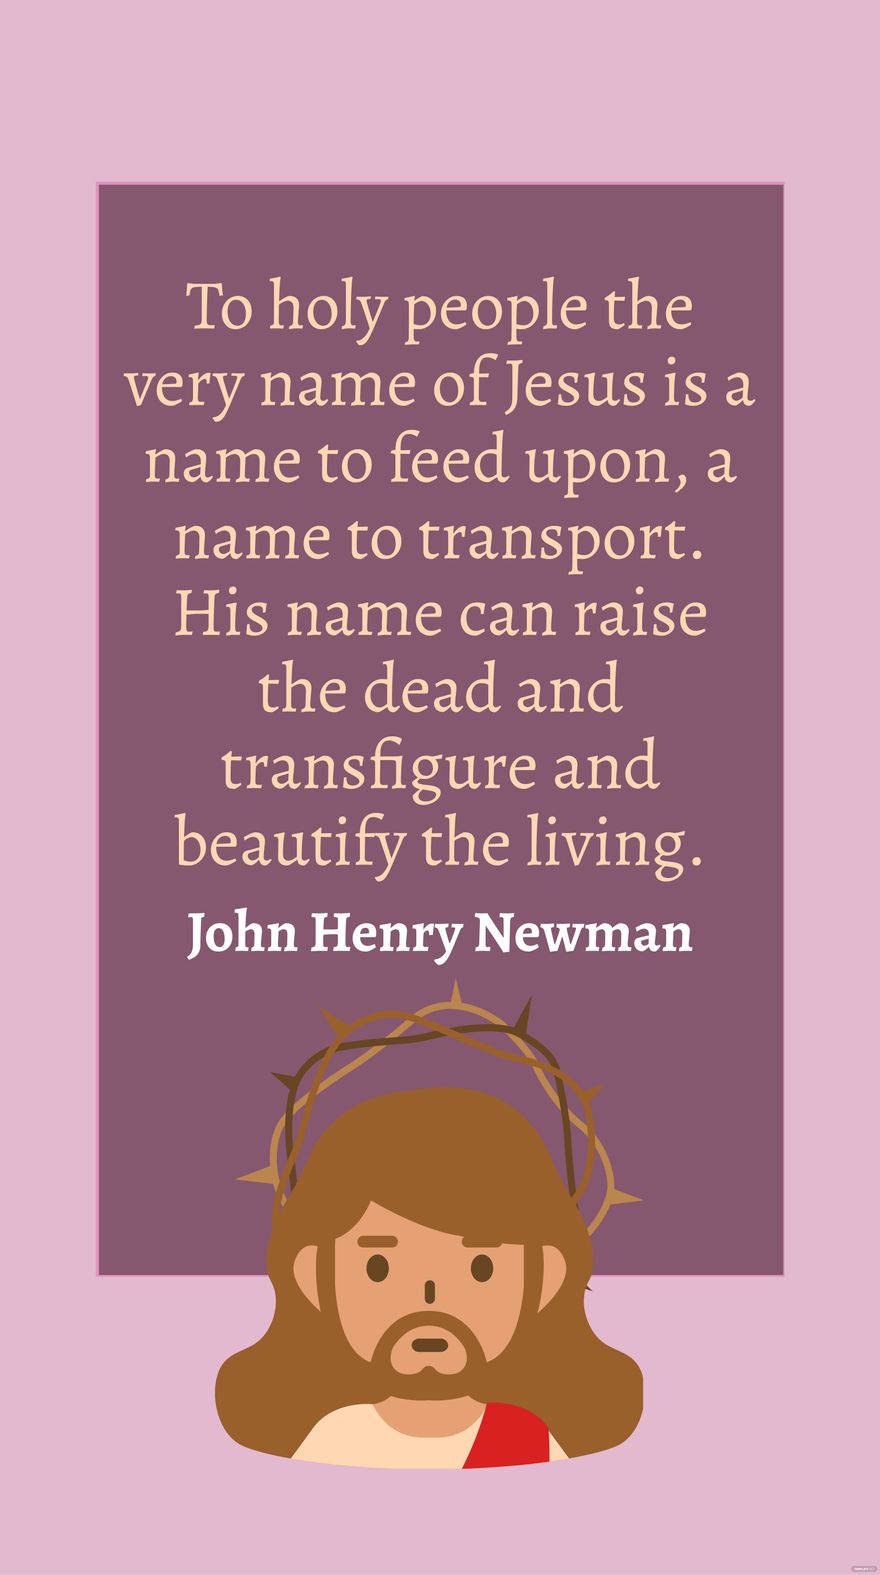 John Henry Newman - To holy people the very name of Jesus is a name to feed upon, a name to transport. His name can raise the dead and transfigure and beautify the living.